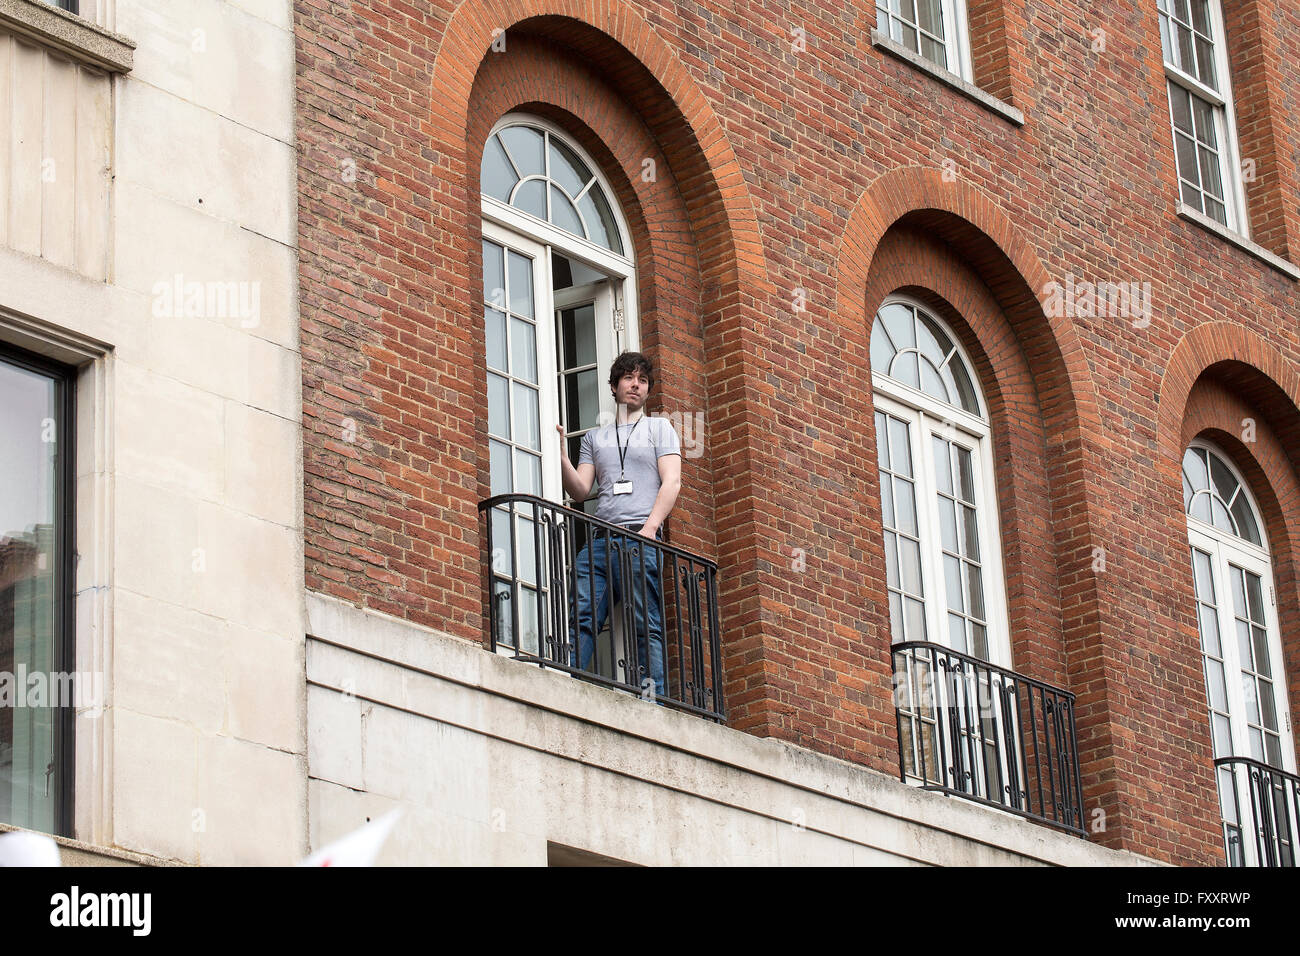 Anti-Austerity March. A young man watches from his apartment as the anti-austerity march passes by. Stock Photo